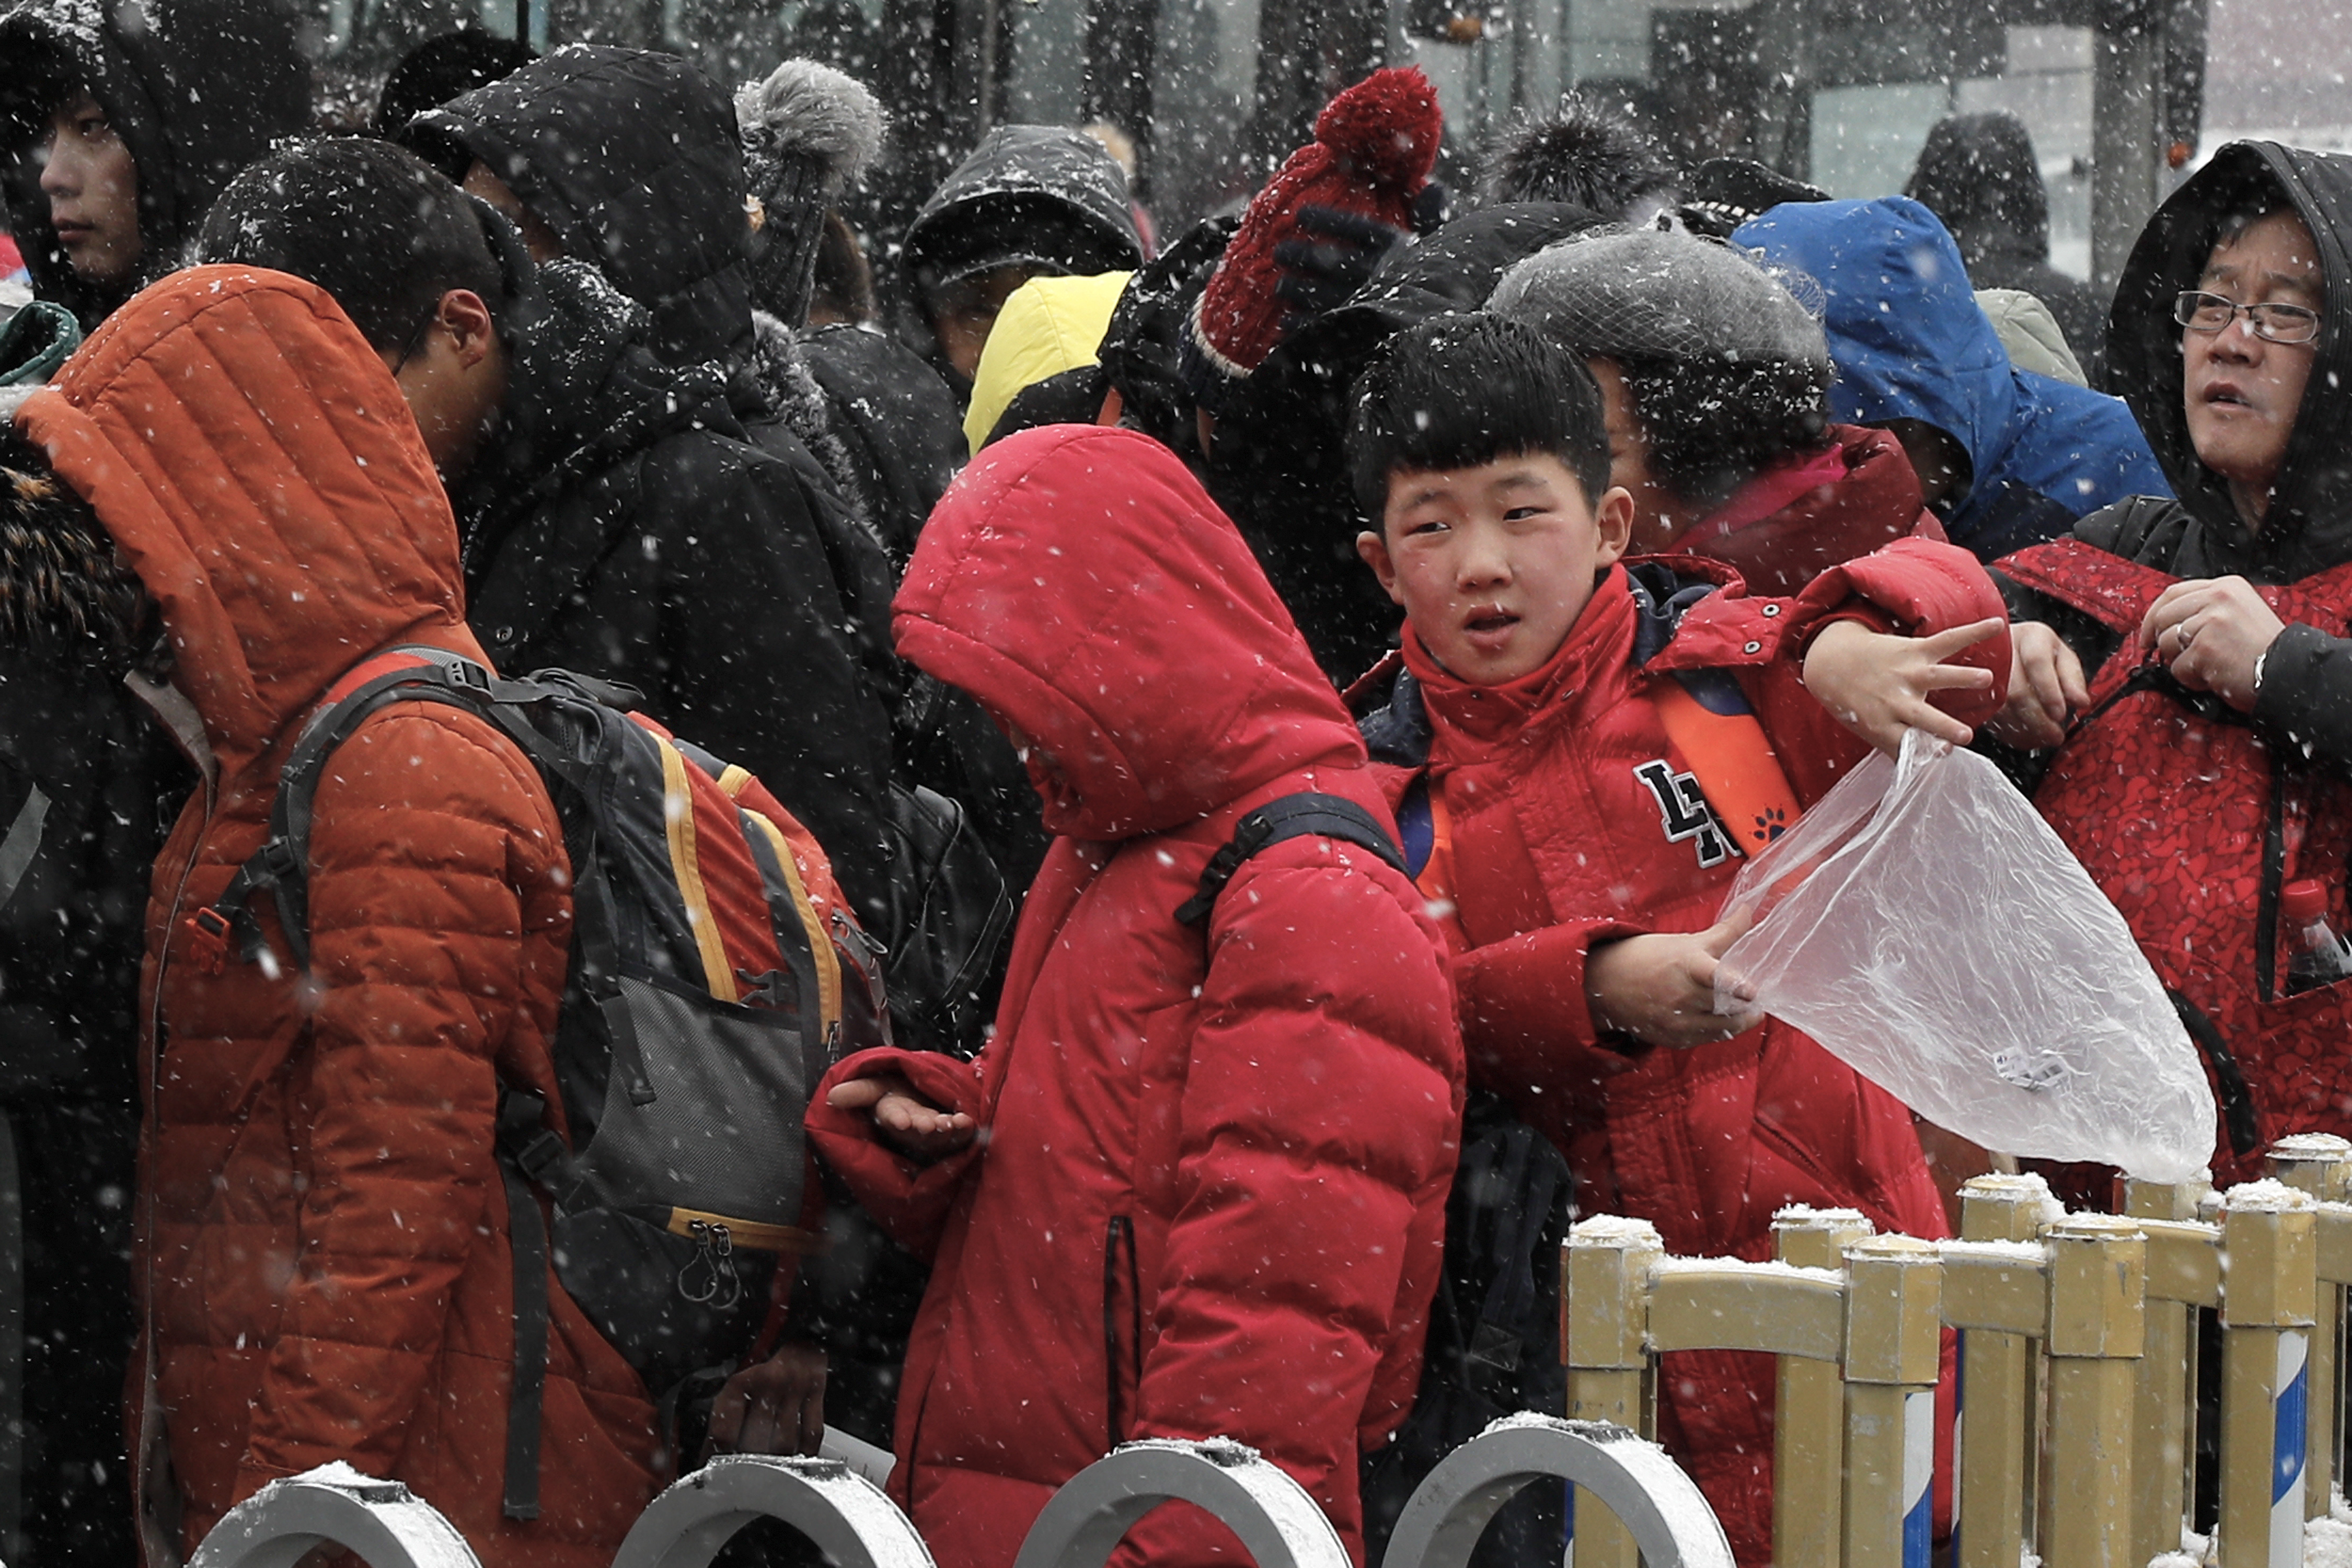 A child uses a plastic bag to catch snow as people line-up to enter the National Museum in Beijing, Tuesday, Feb. 12, 2019. China's capital is mostly dry in the winter but a storm system brought snow to the city on Tuesday morning. (AP Photo/Andy Wong)